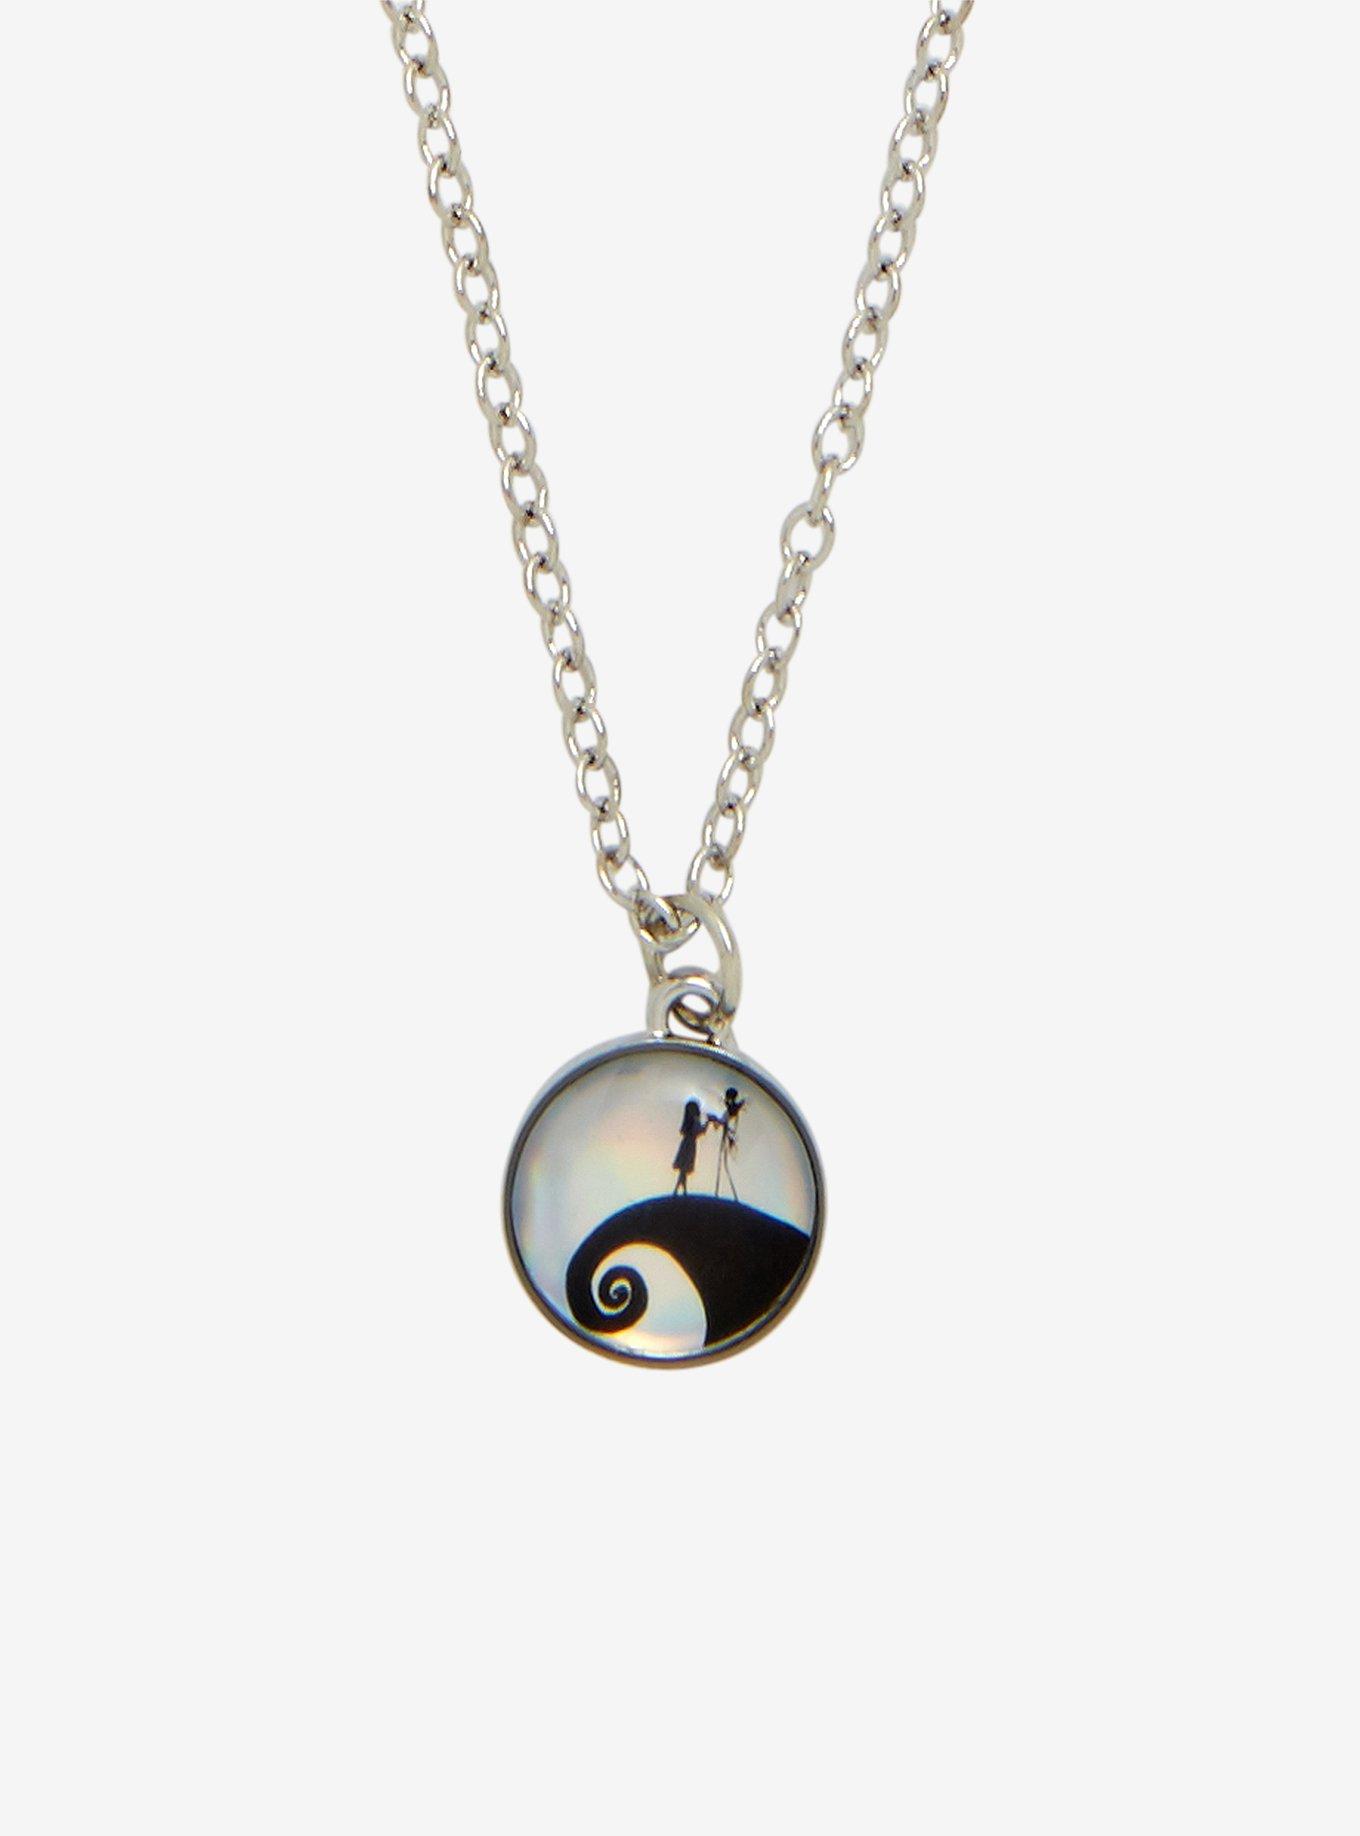 The Nightmare Before Christmas 25th Anniversary 12 Day Interchangeable Necklace Set, , alternate